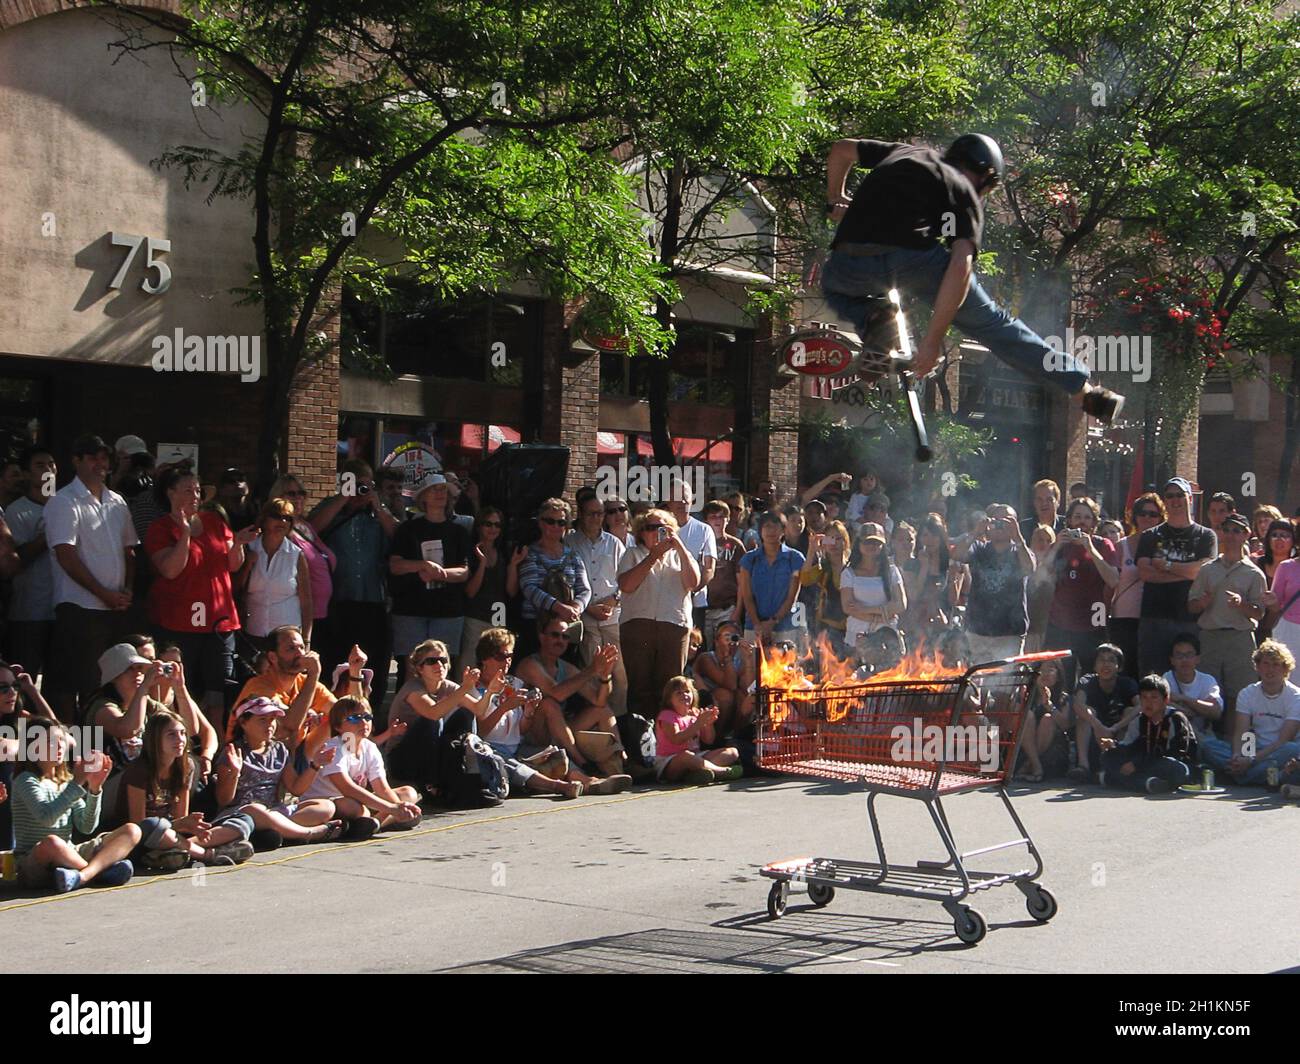 Toronto, Ontario / Canada - Aug. 21, 2008: Performing Acrobat of jumping over the fire on the Street Festival Stock Photo